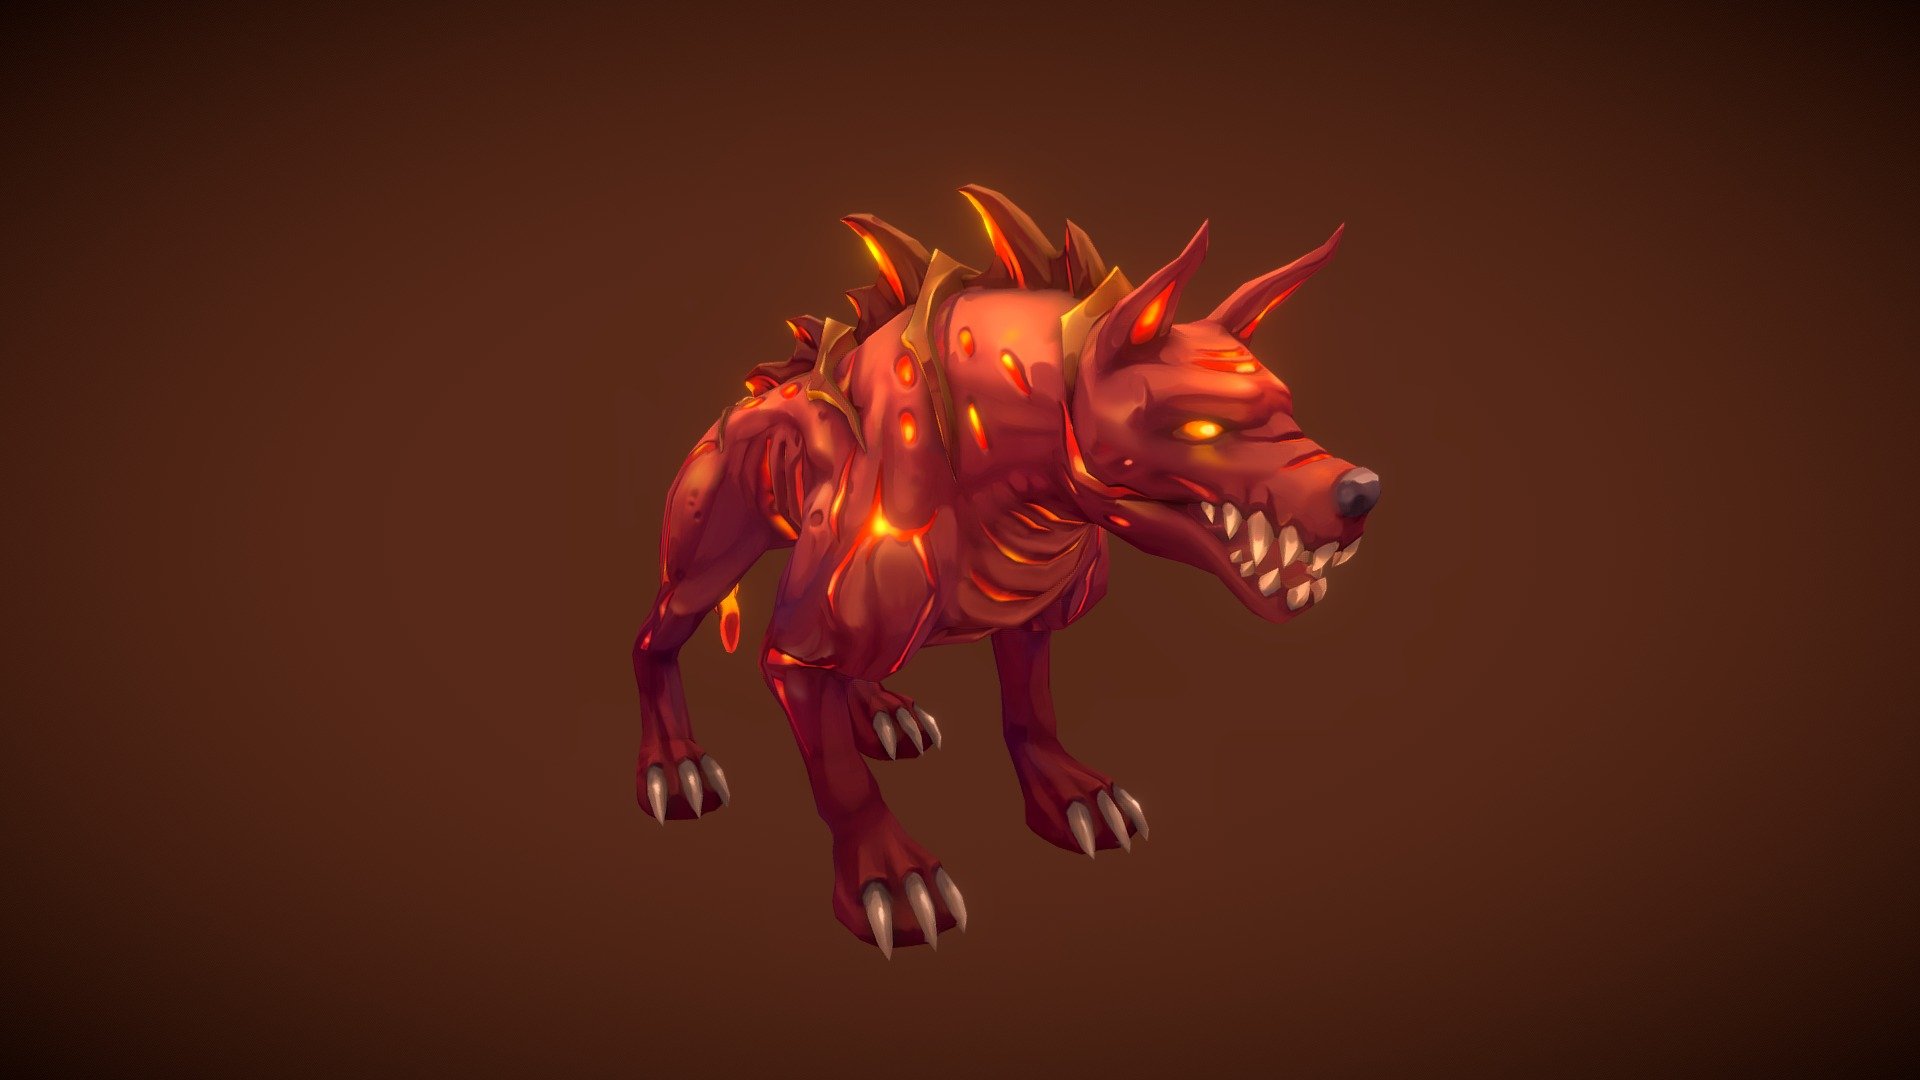 Stylized character for a project.

Software used: Zbrush, Autodesk Maya, Autodesk 3ds Max, Substance Painter - Stylized Fantasy Hell Hound - 3D model by N-hance Studio (@Malice6731) 3d model